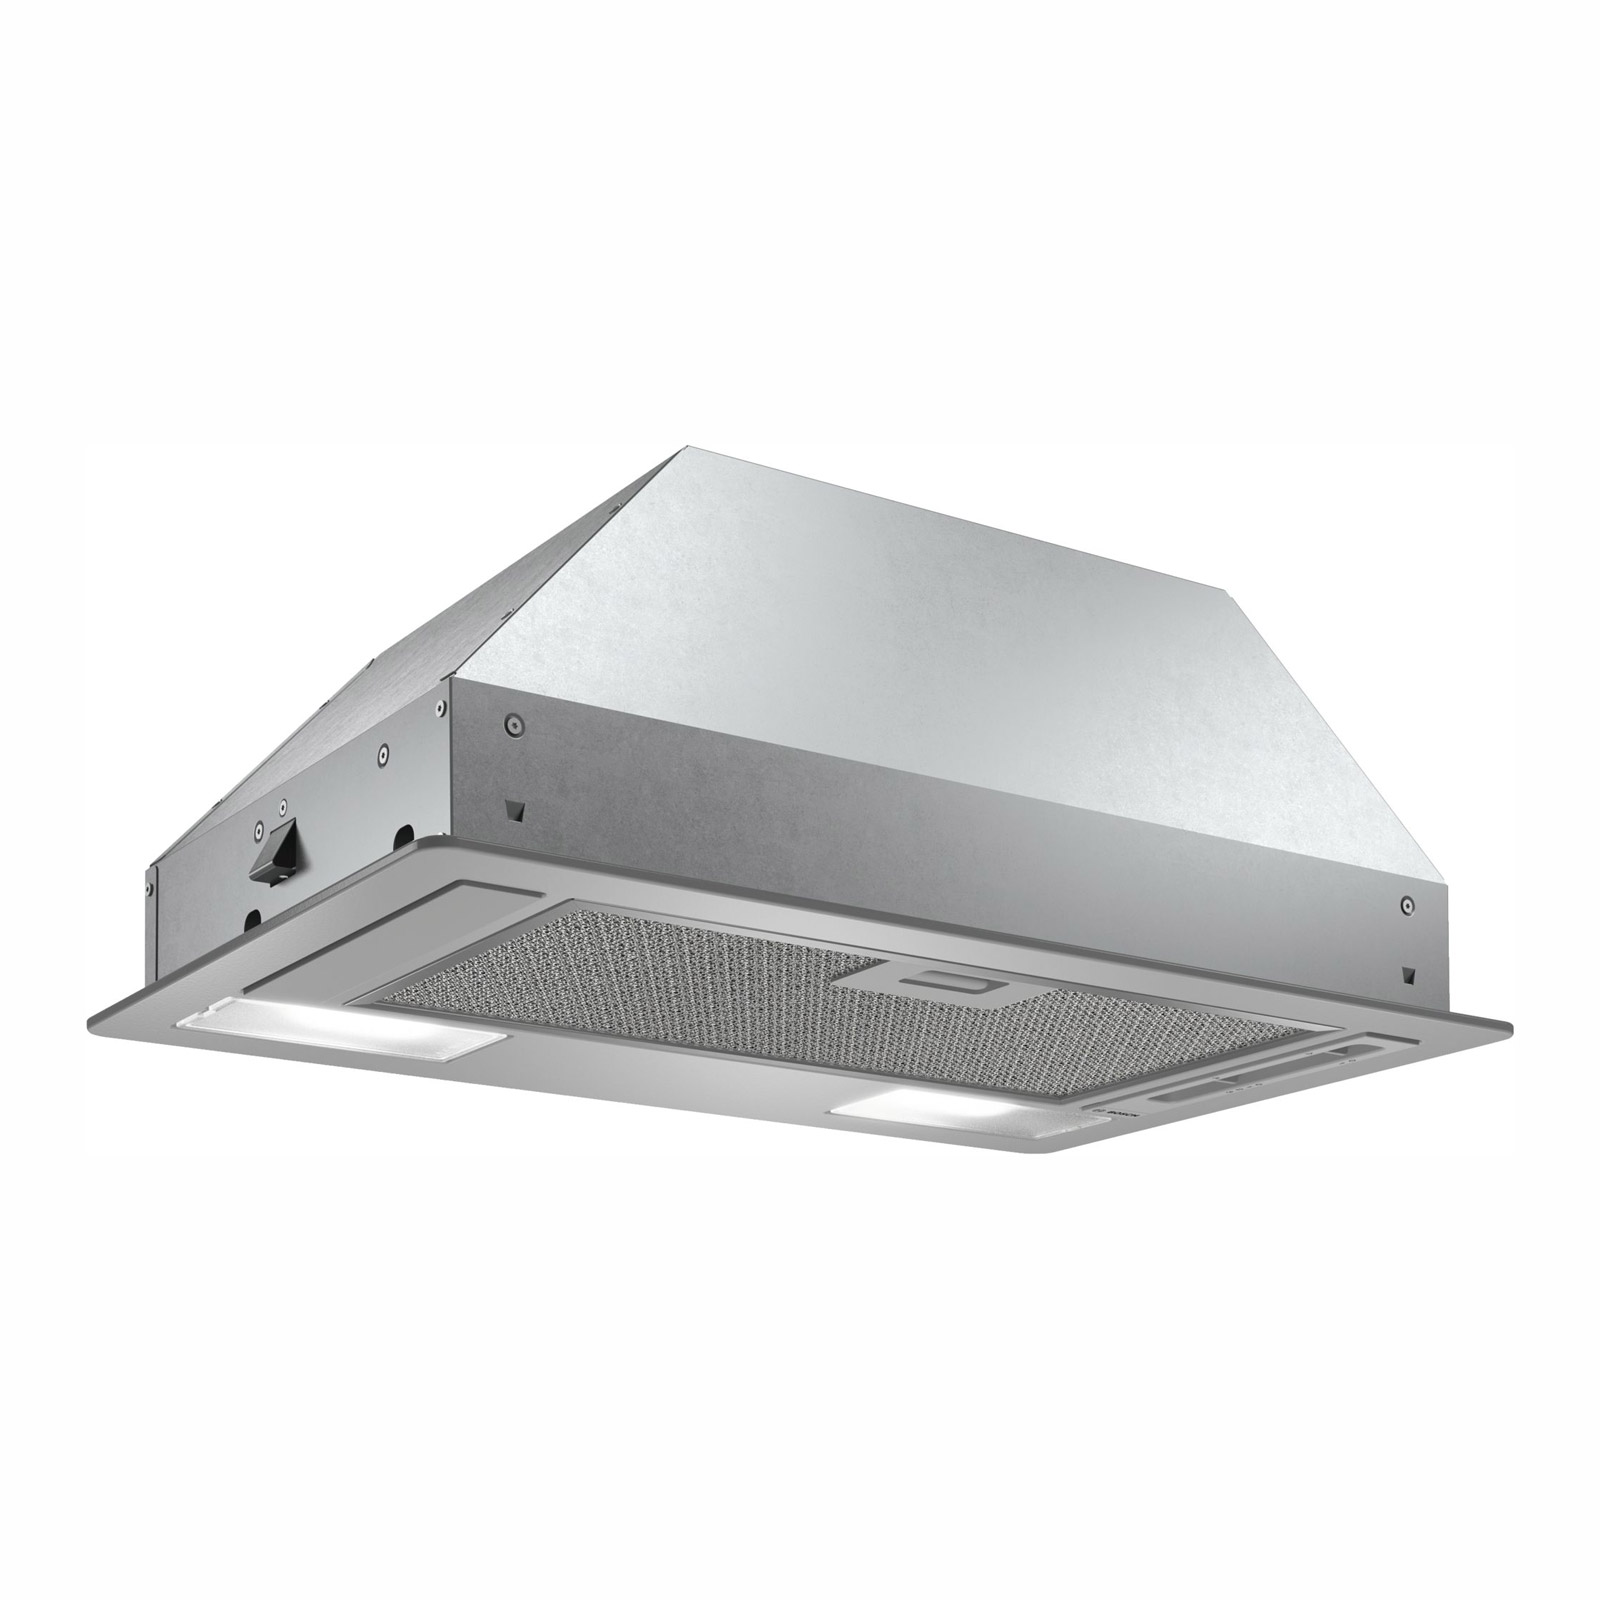 Image of Bosch DLN53AA70B Series 2 53cm Integrated Canopy Cooker Hood in Silver